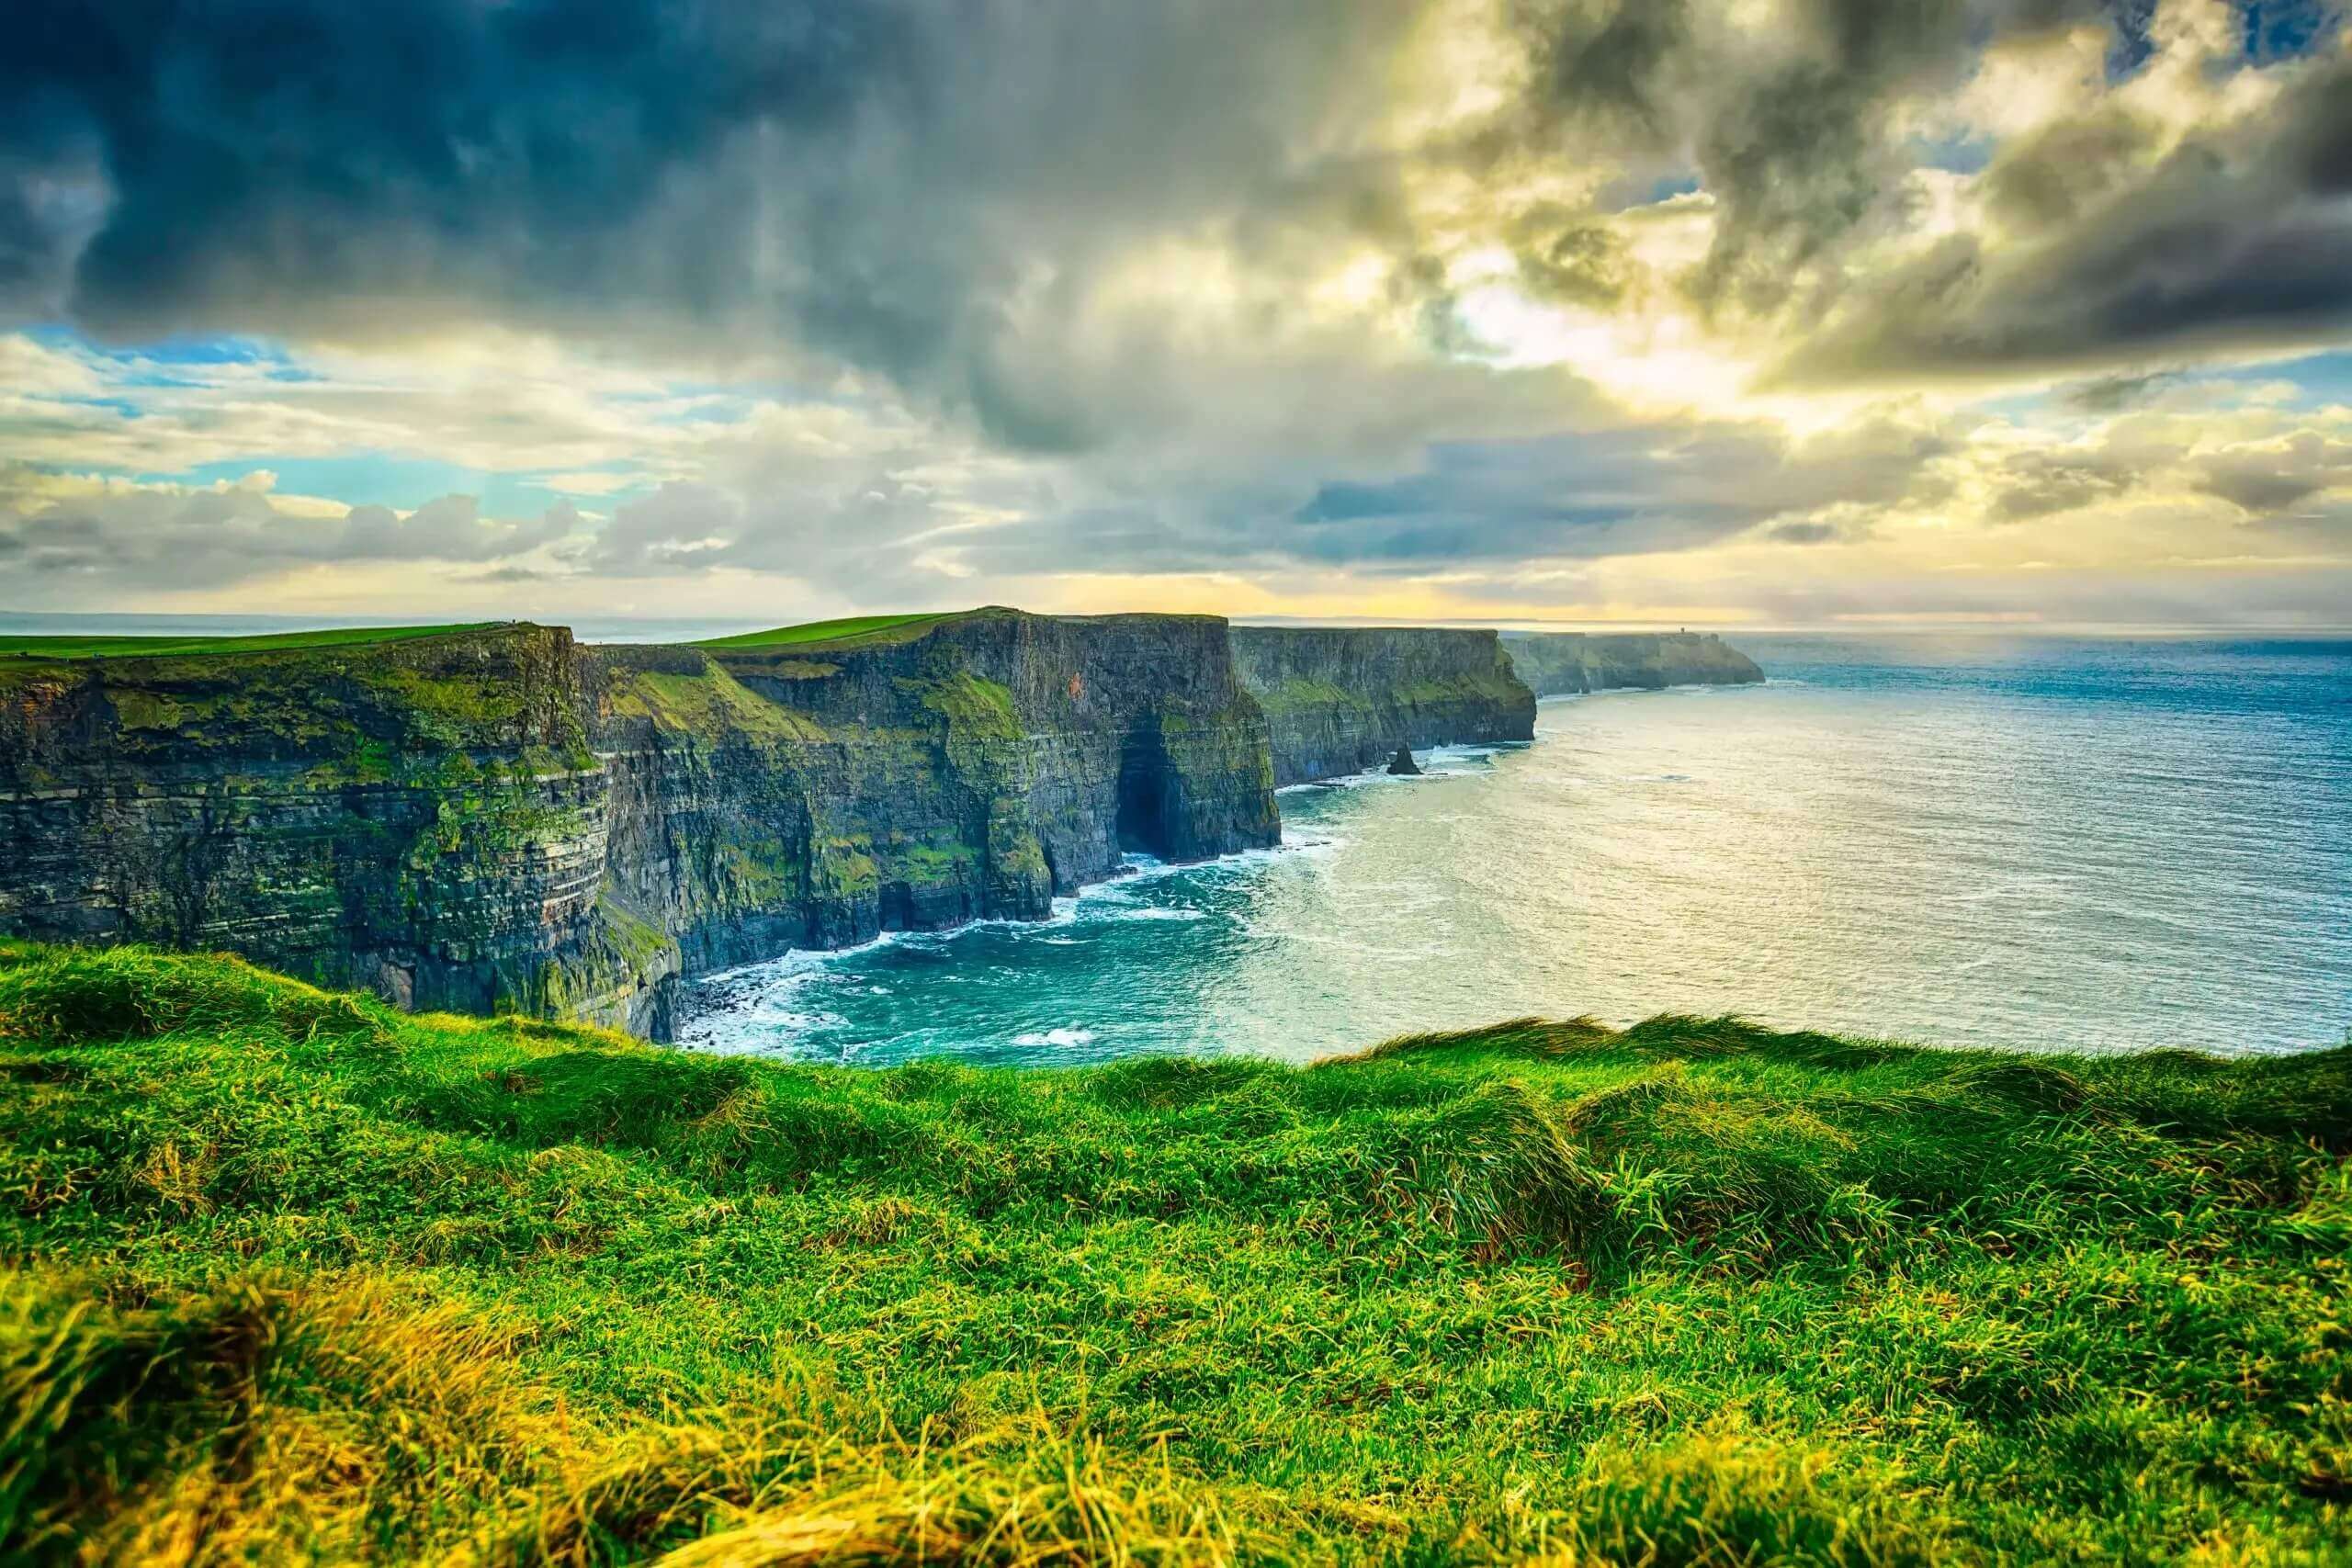 Local Pass to the Cliffs of Moher